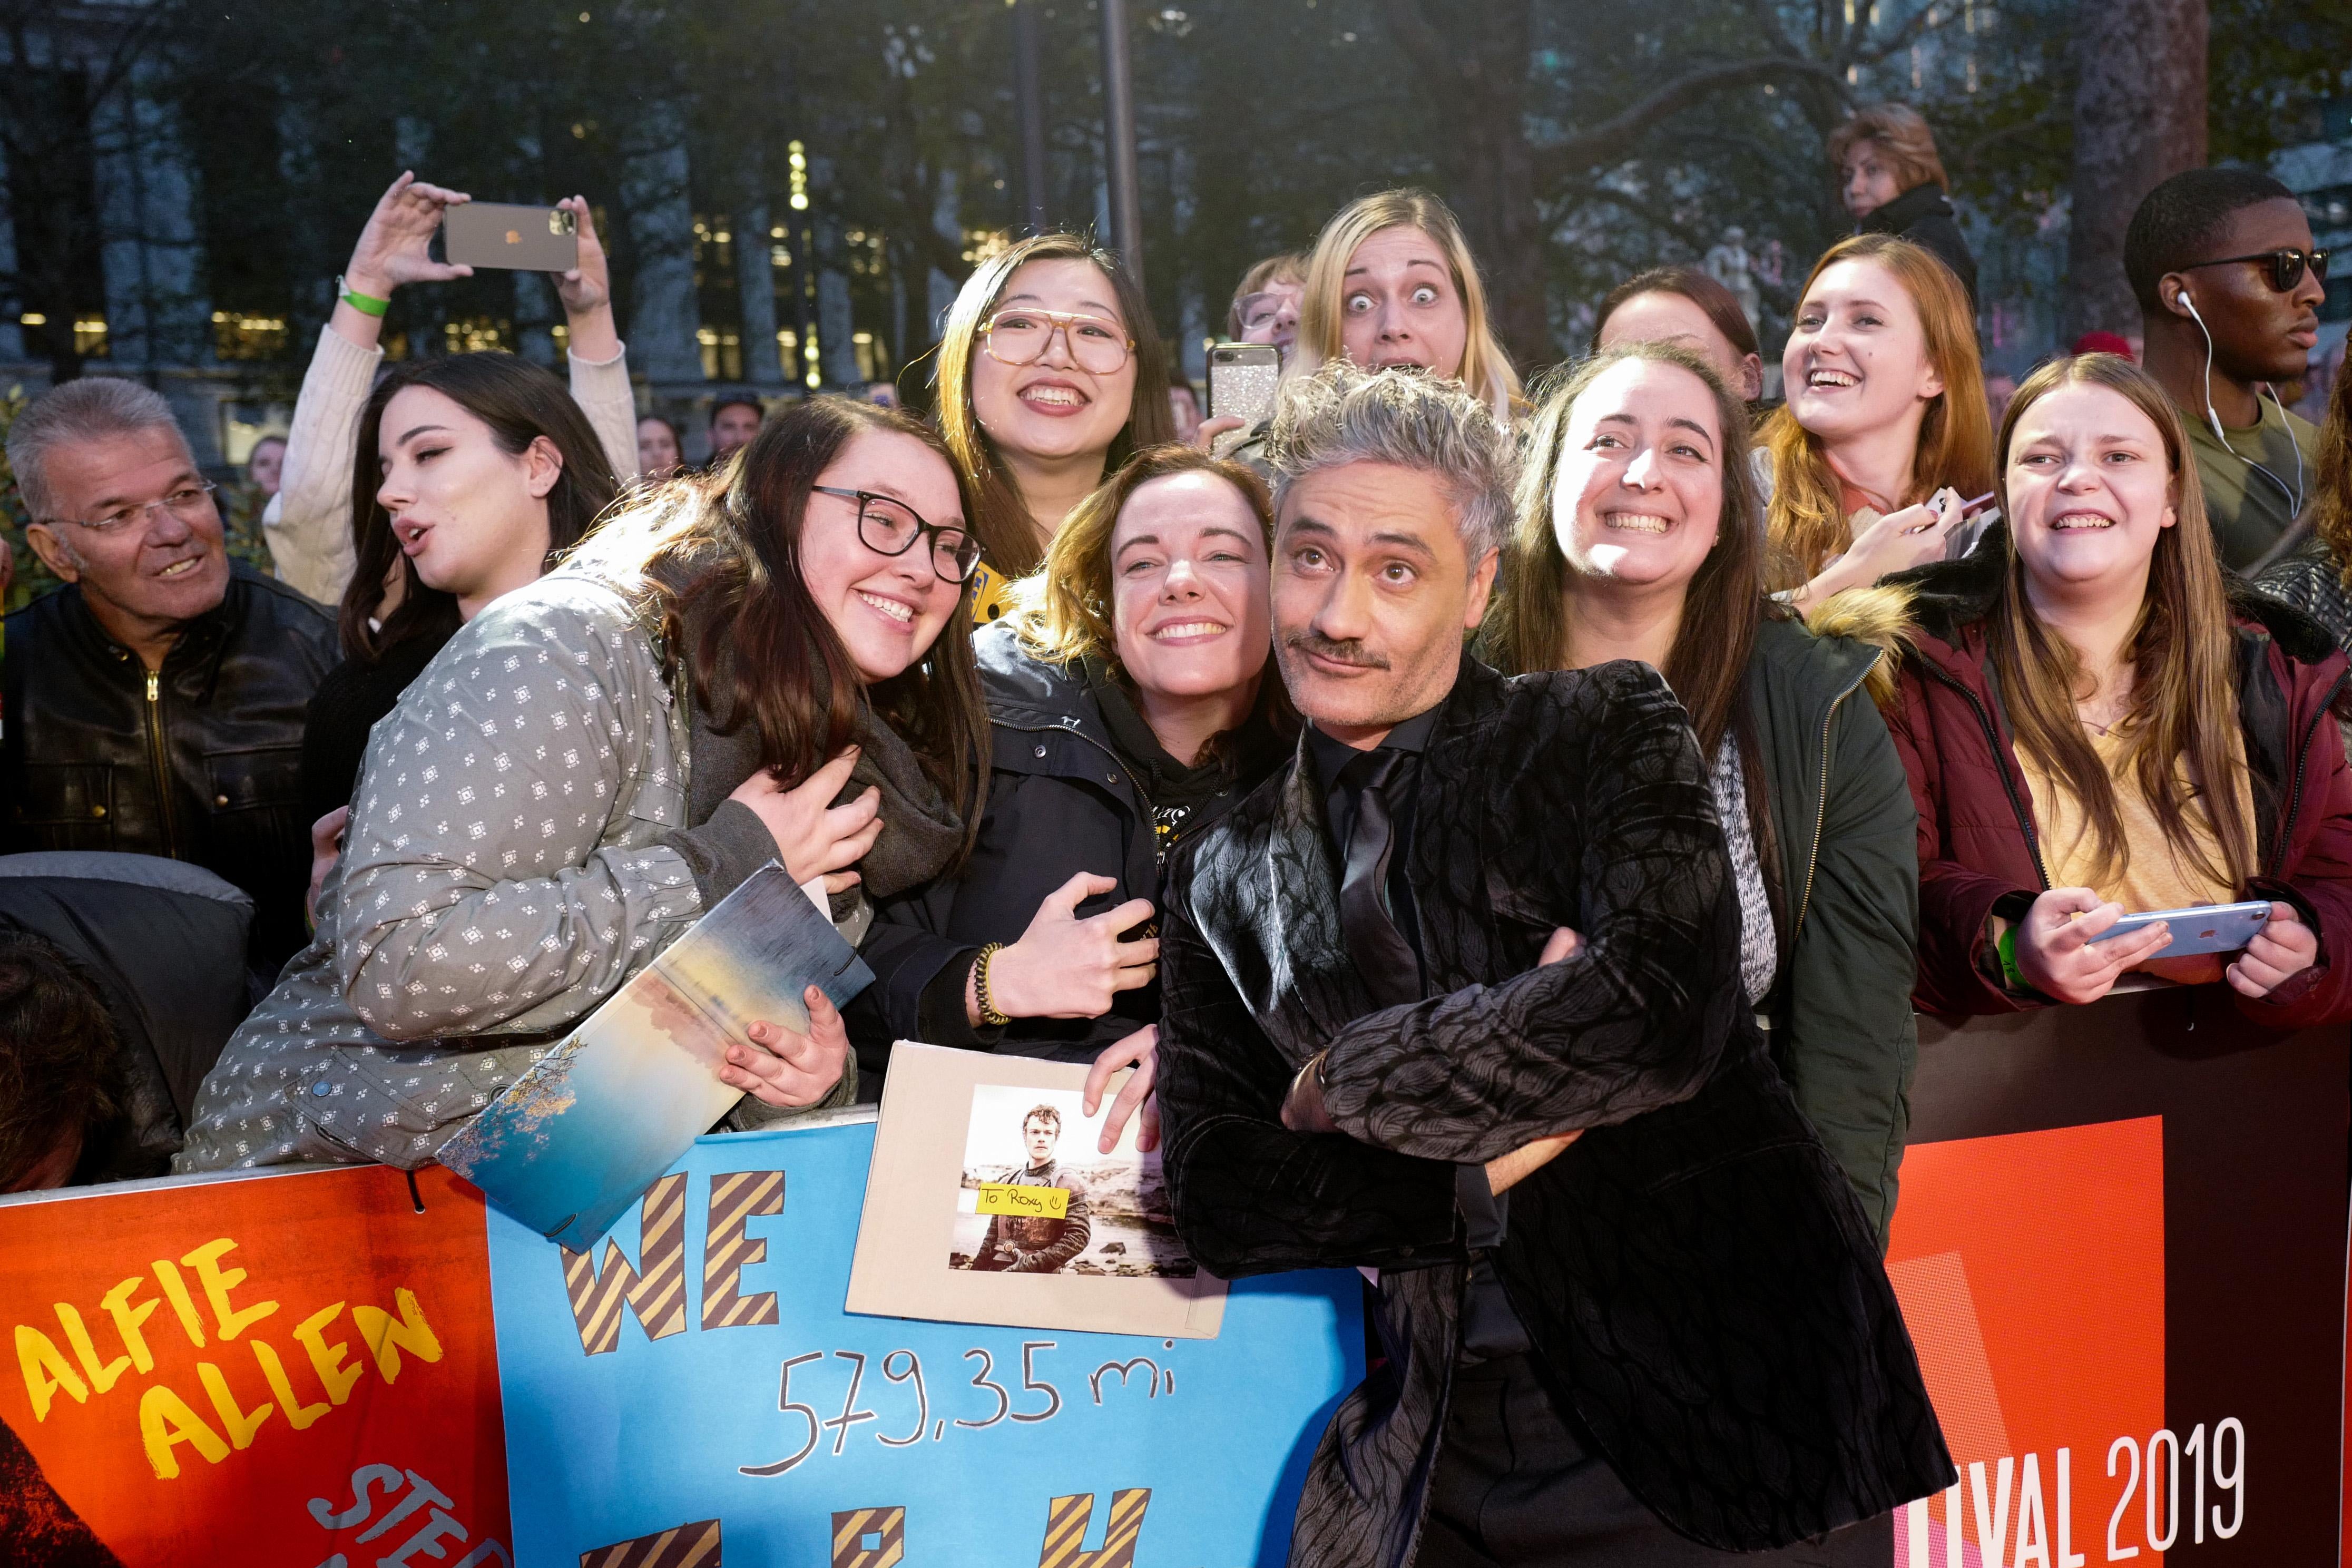 Taika Waititi mugs for the cameras on the red carpet surrounded by teens.